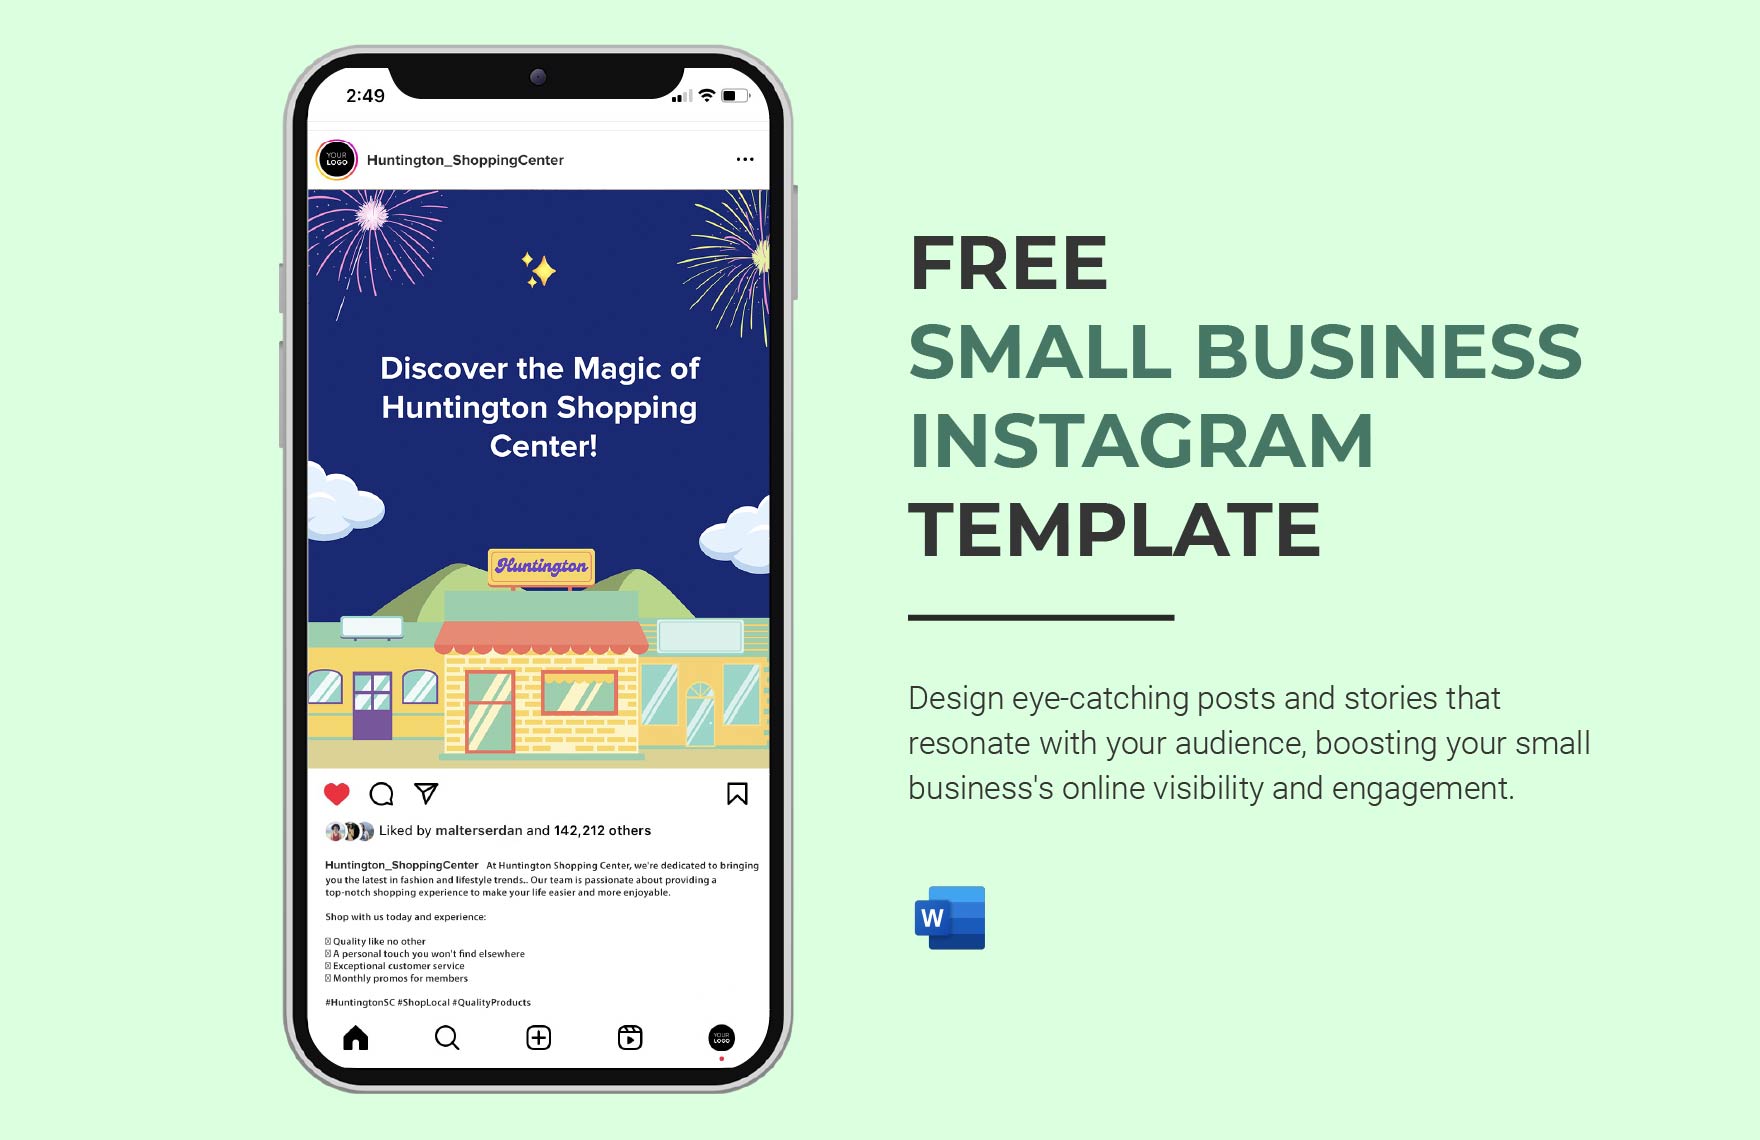 Free Small Business Instagram Template